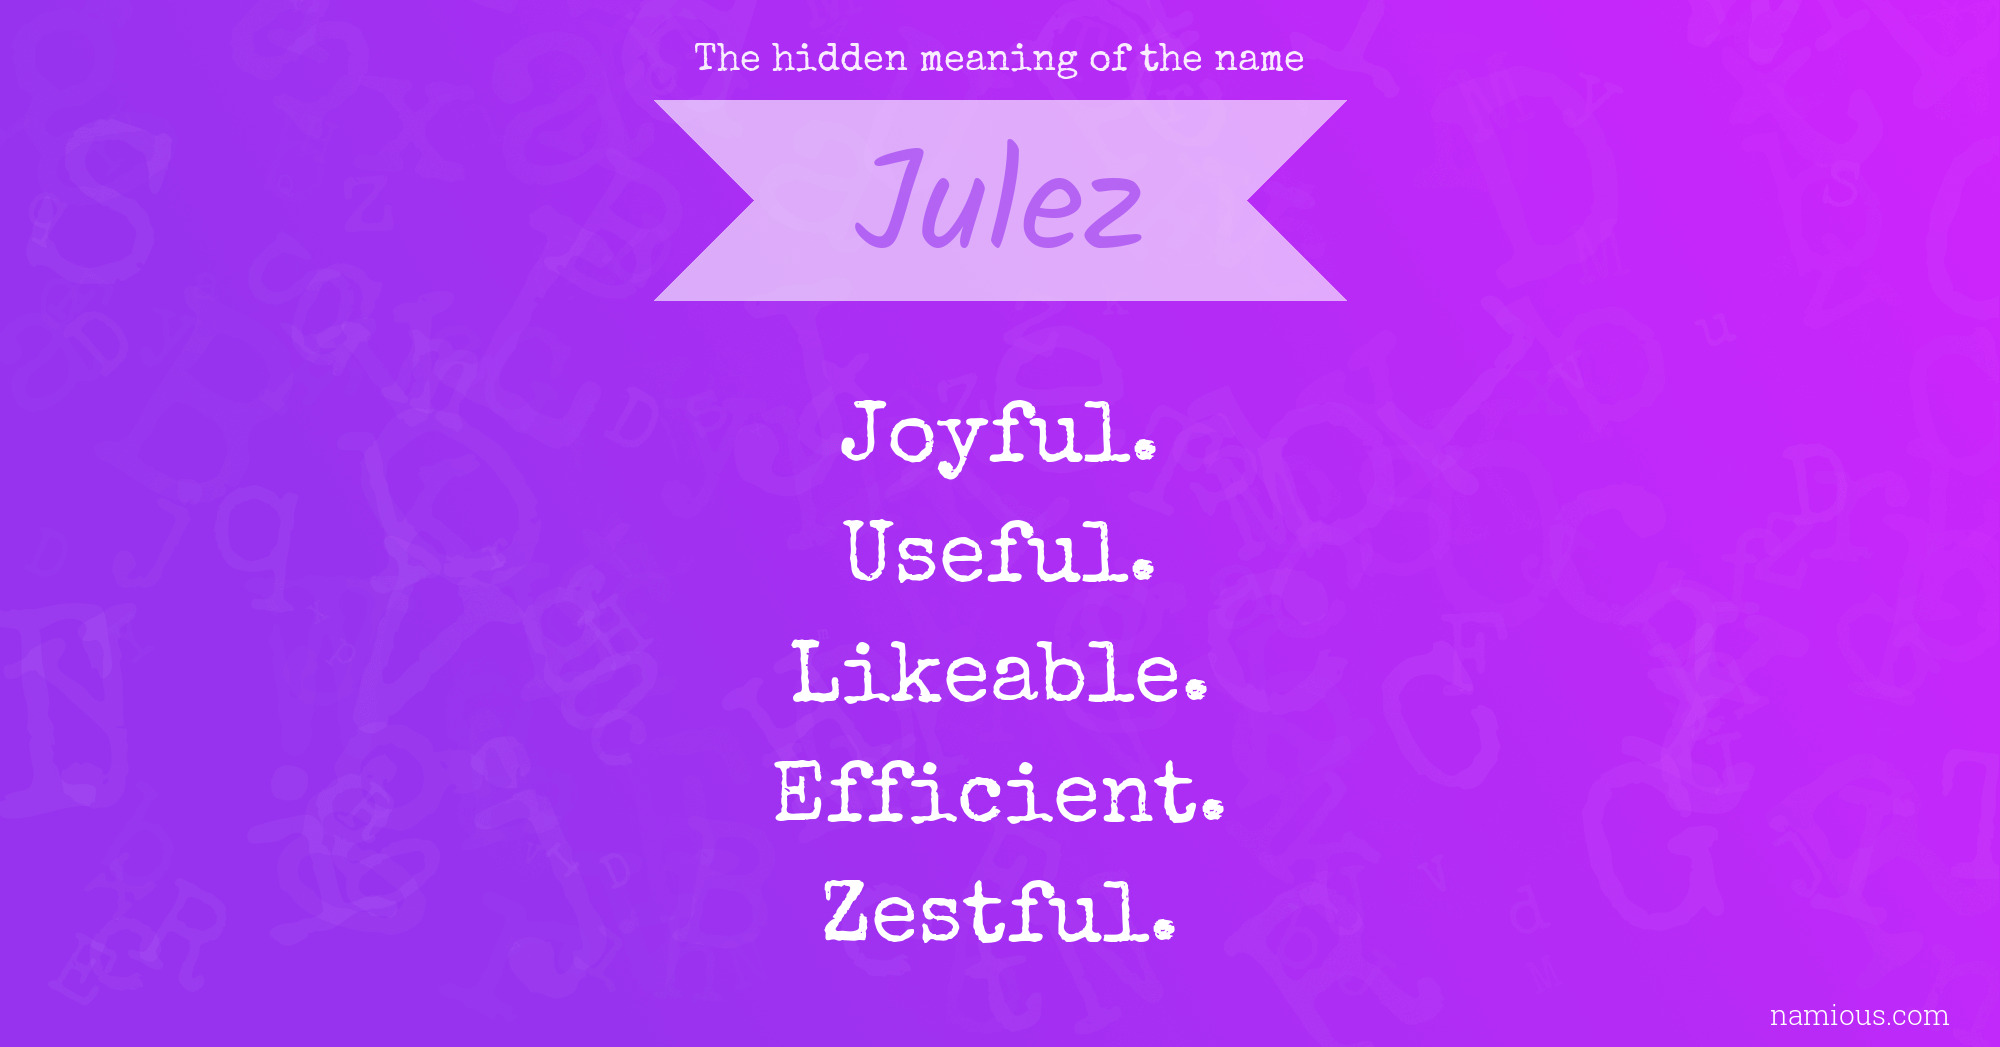 The hidden meaning of the name Julez